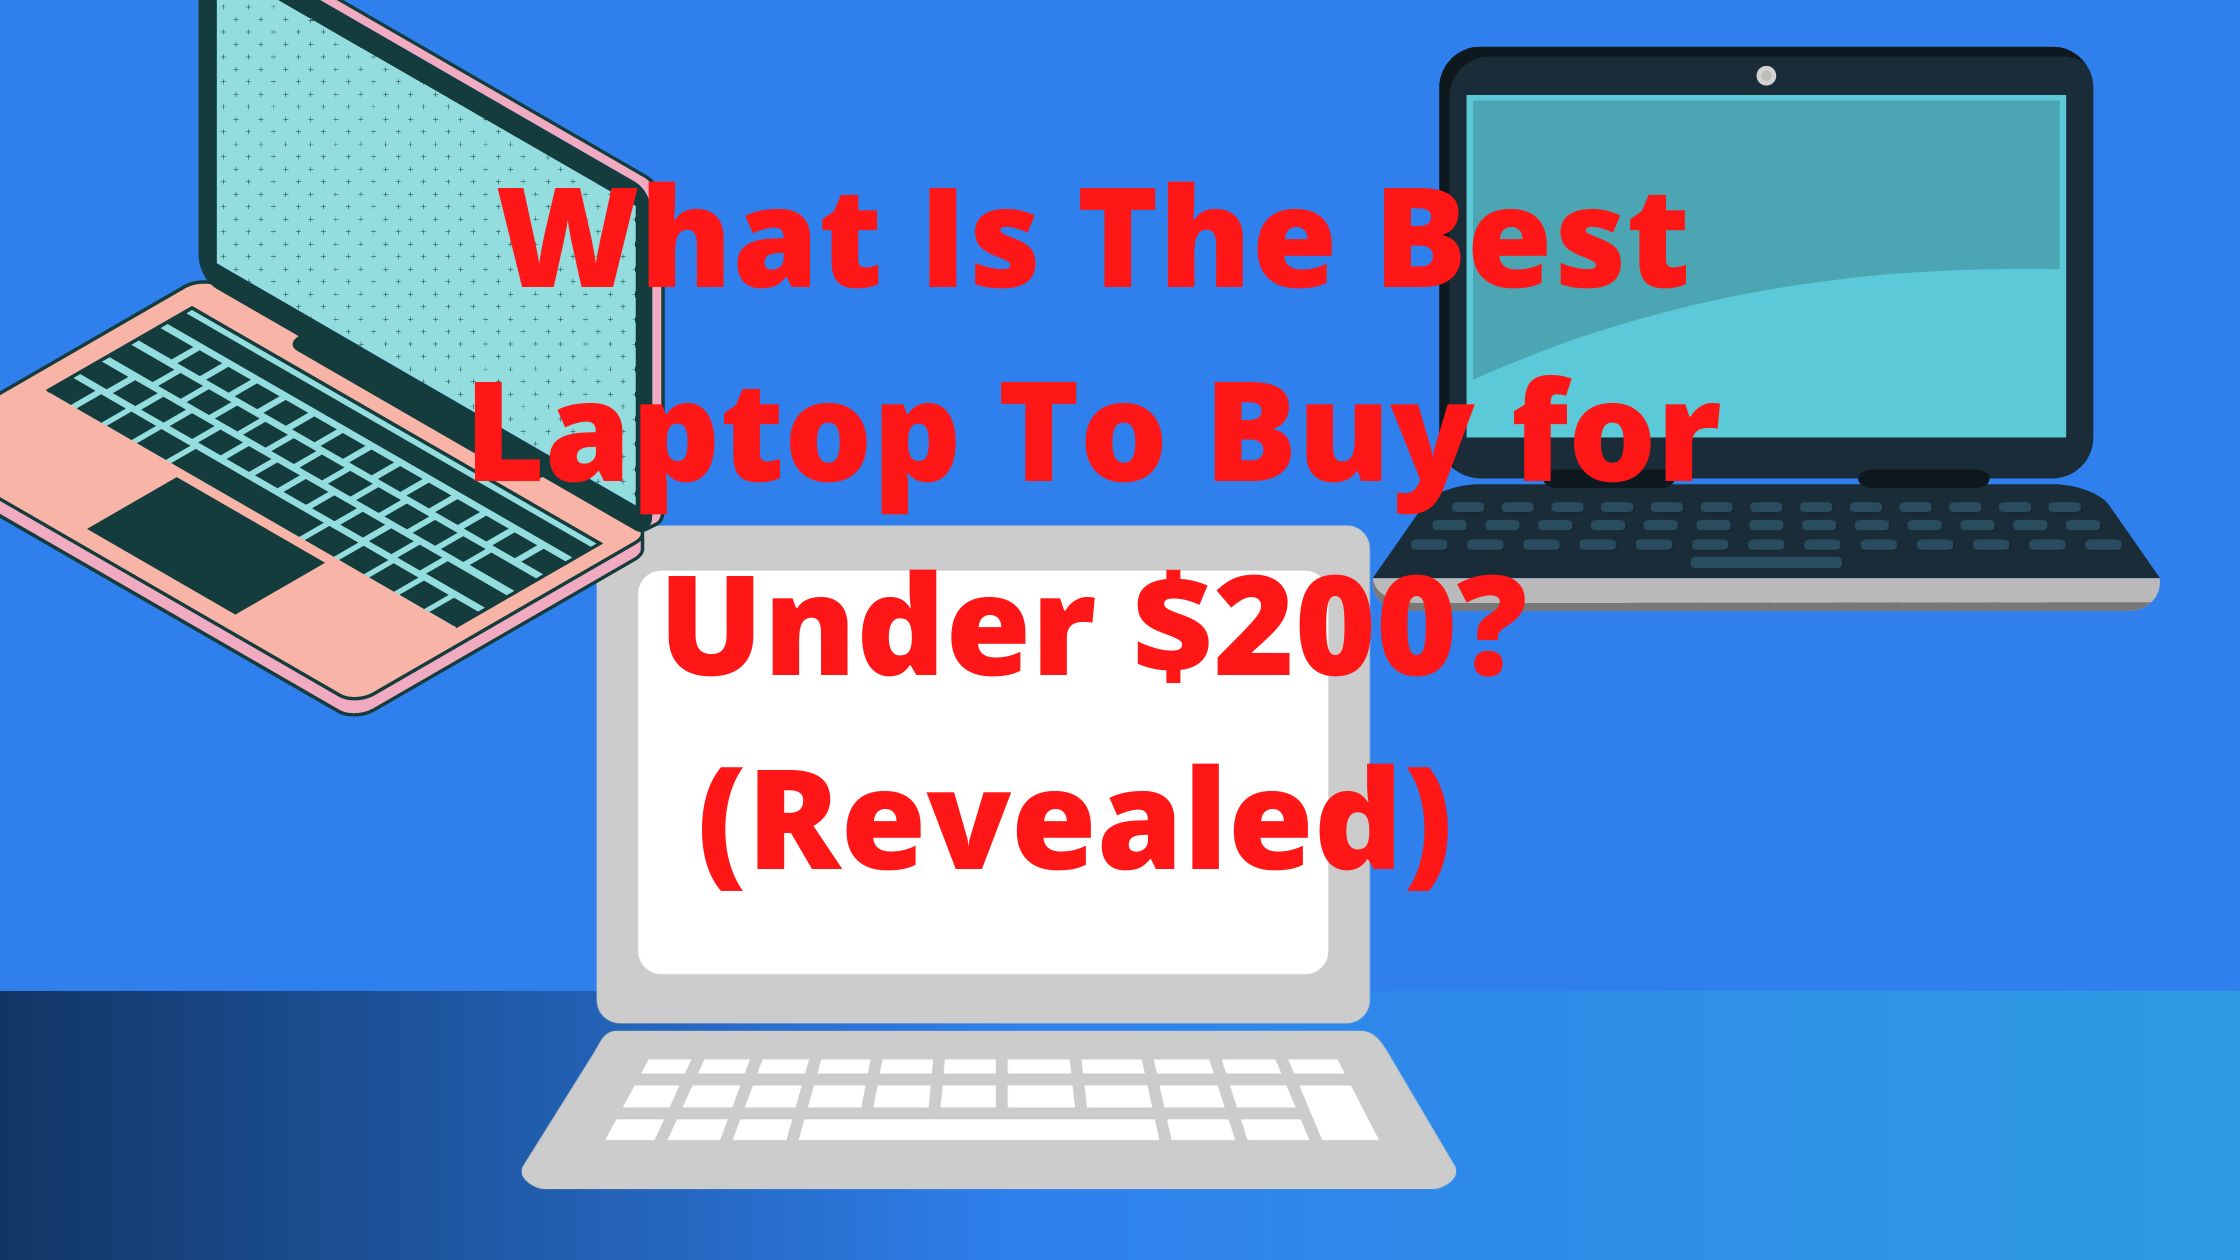 What Is The Best Laptop To Buy for Under $200? (Revealed)